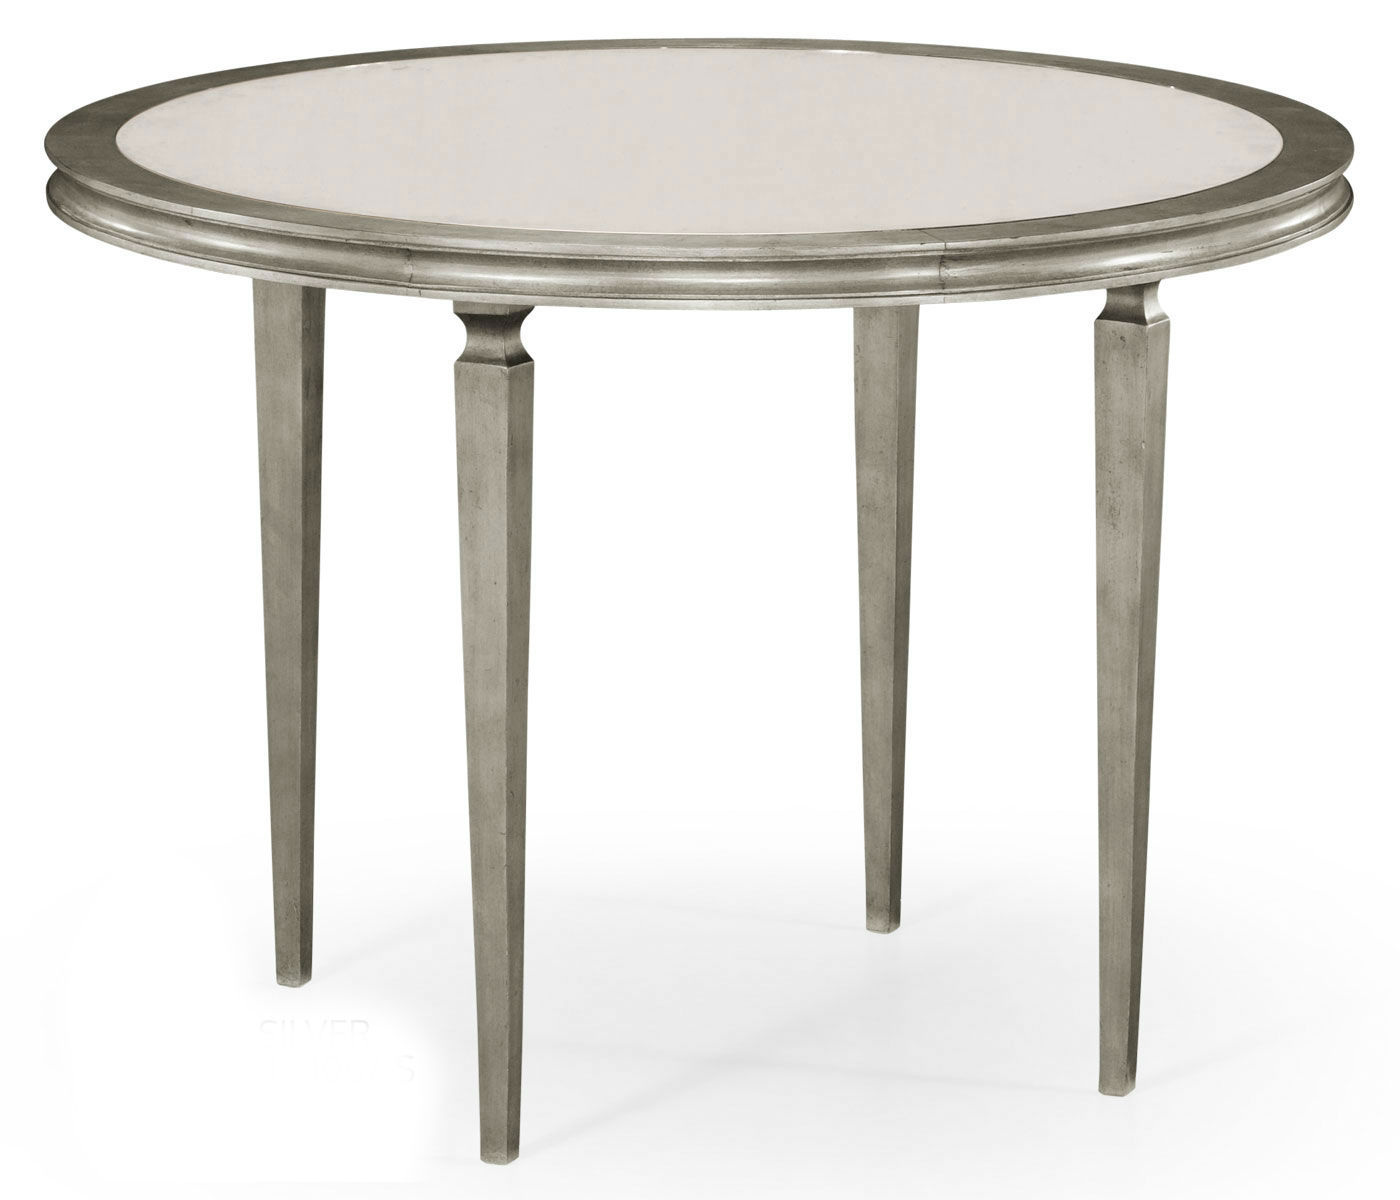 stunning large side table round white target legs marblegold top emperor gloss small cleo gold black plans silver glass pedestal tablecloth metal and marble wood argos upcycled